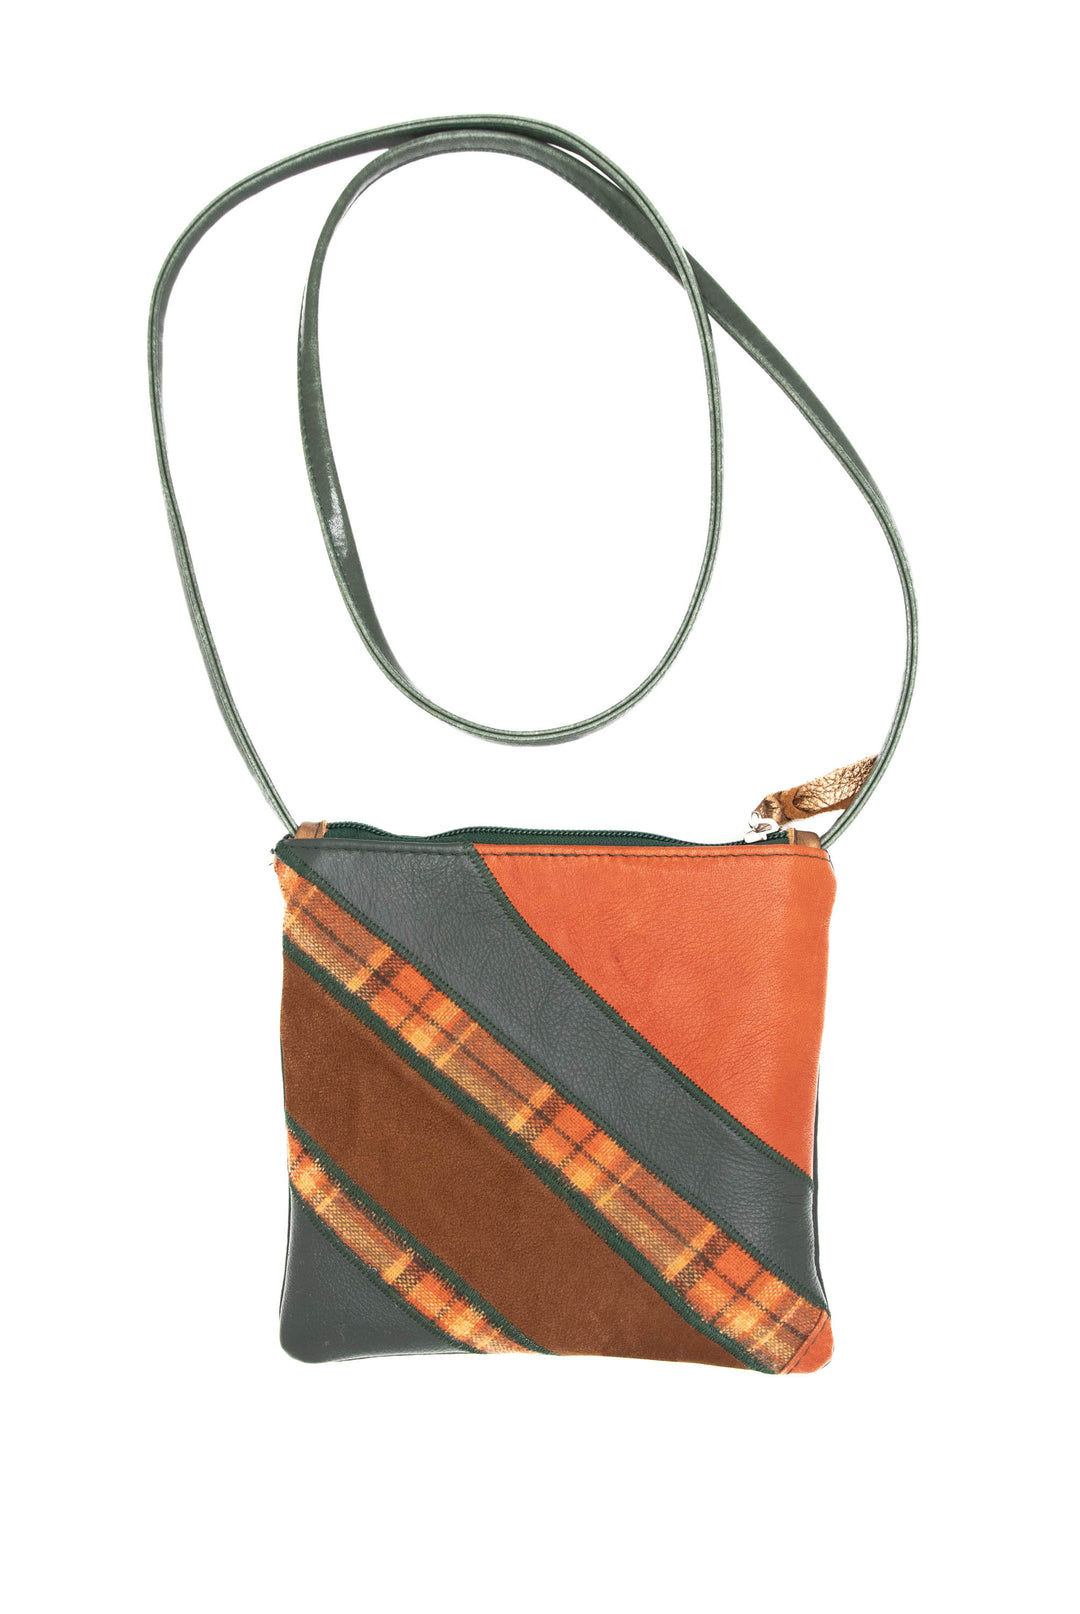 Cha Cha Small Crossbody Bag - Plaid and Green Patchwork 3 - One of a Kind